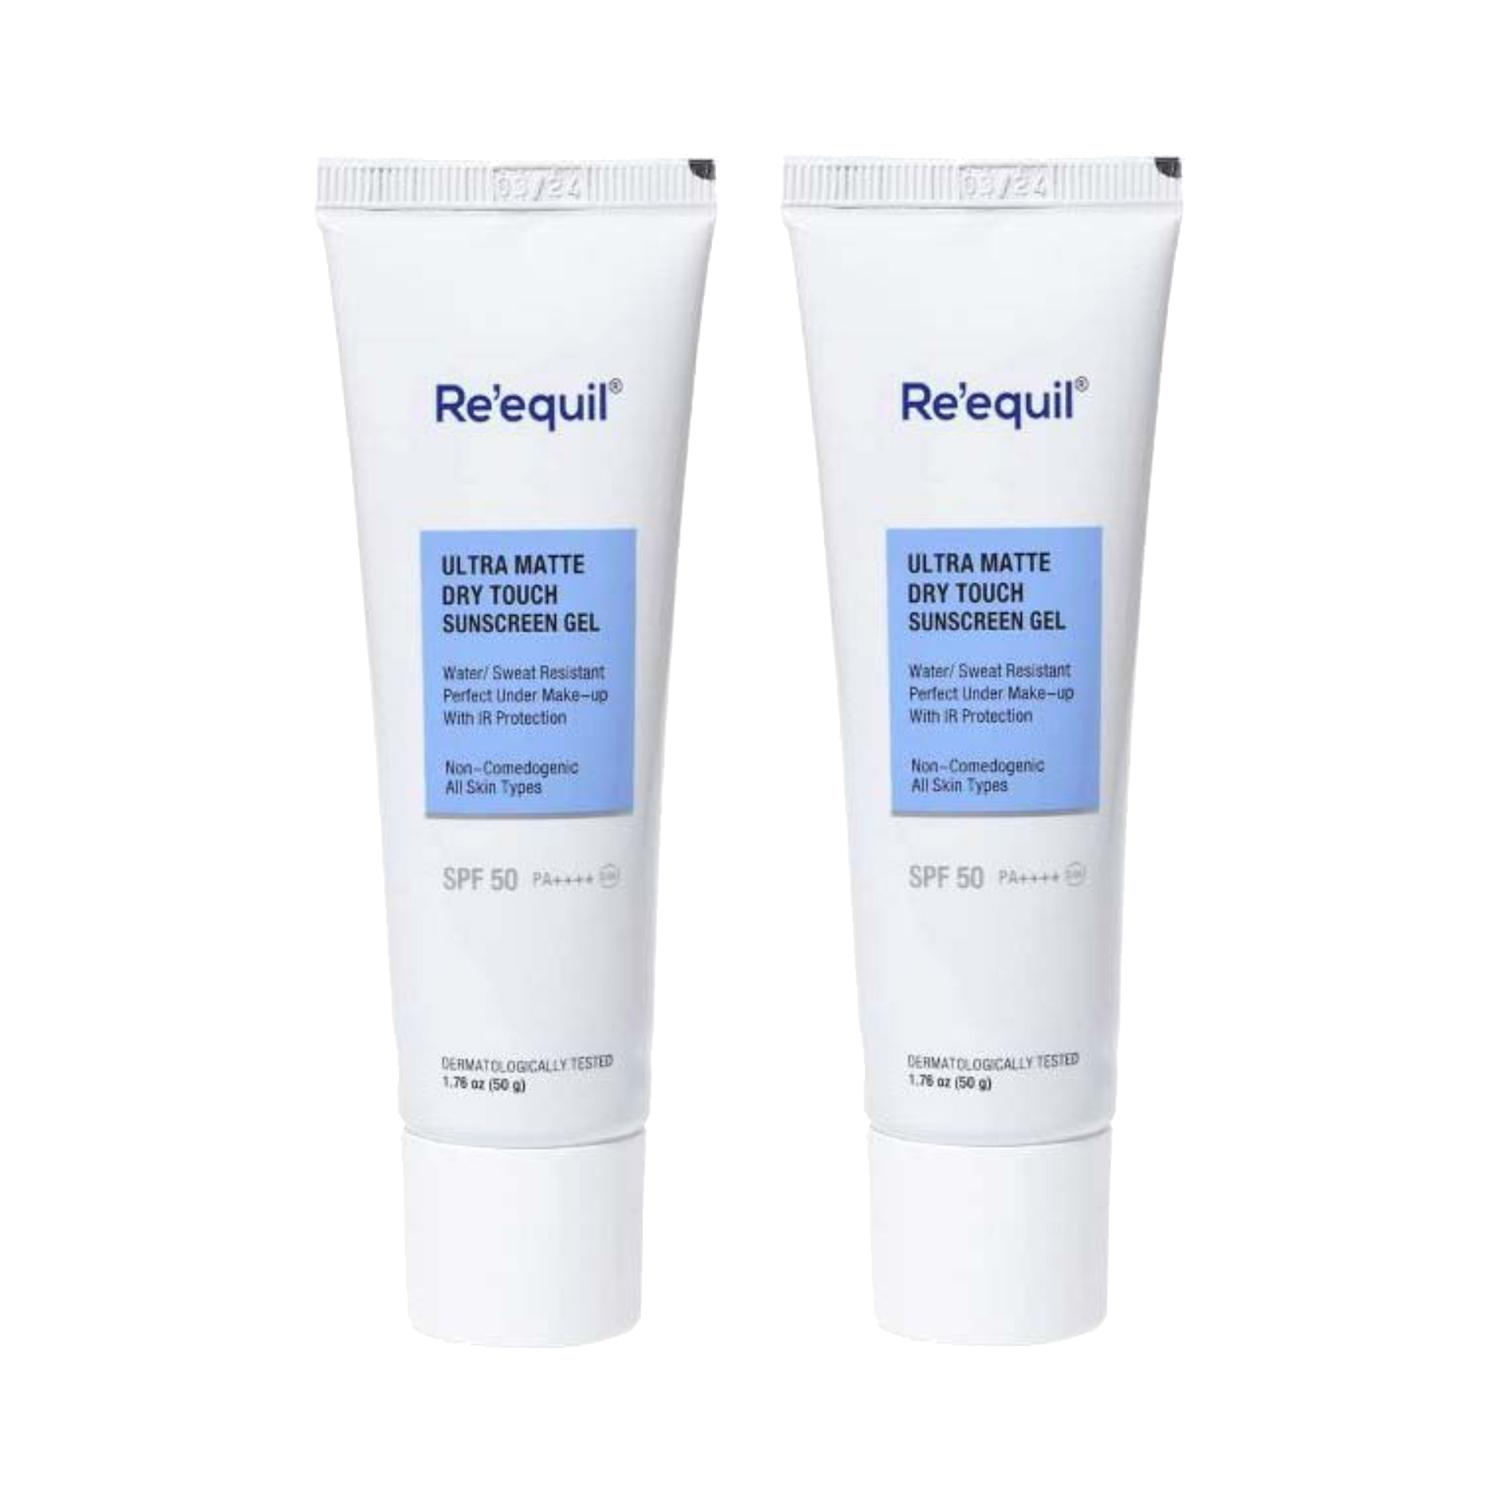 Re'equil Ultra Matte Sunscreen Super Saver (Pack Of 2) Combo